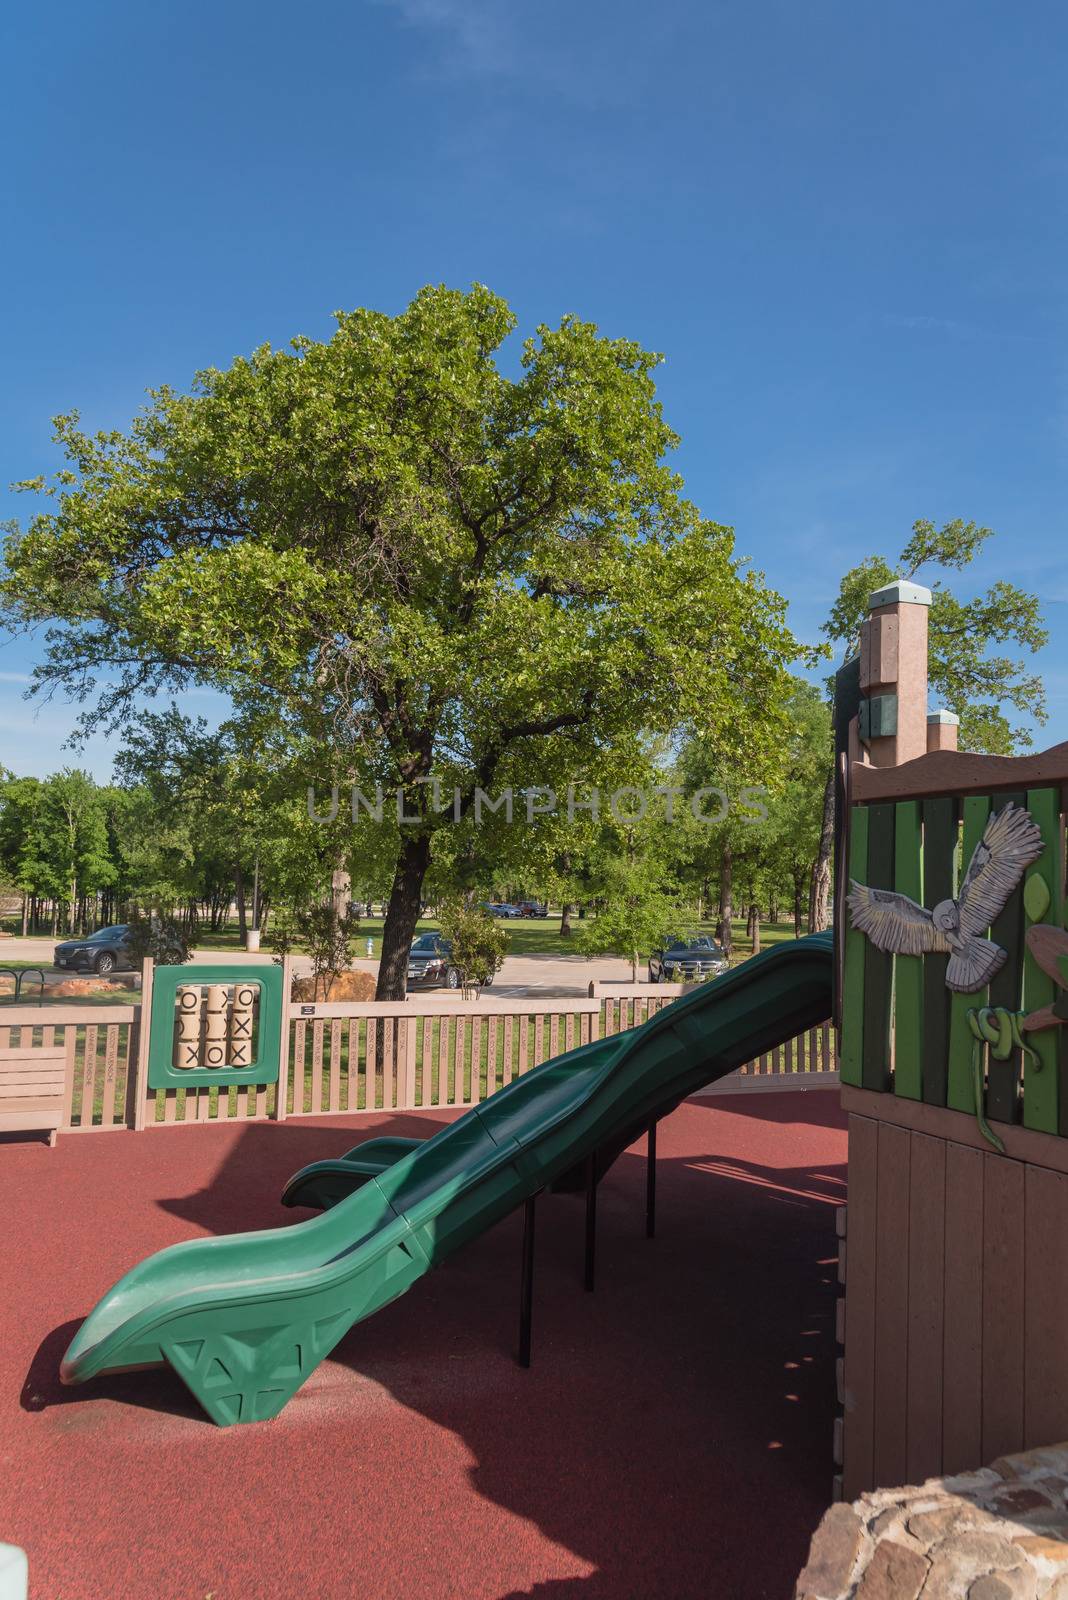 Children wooden playground recreation area with soft surfacing by trongnguyen